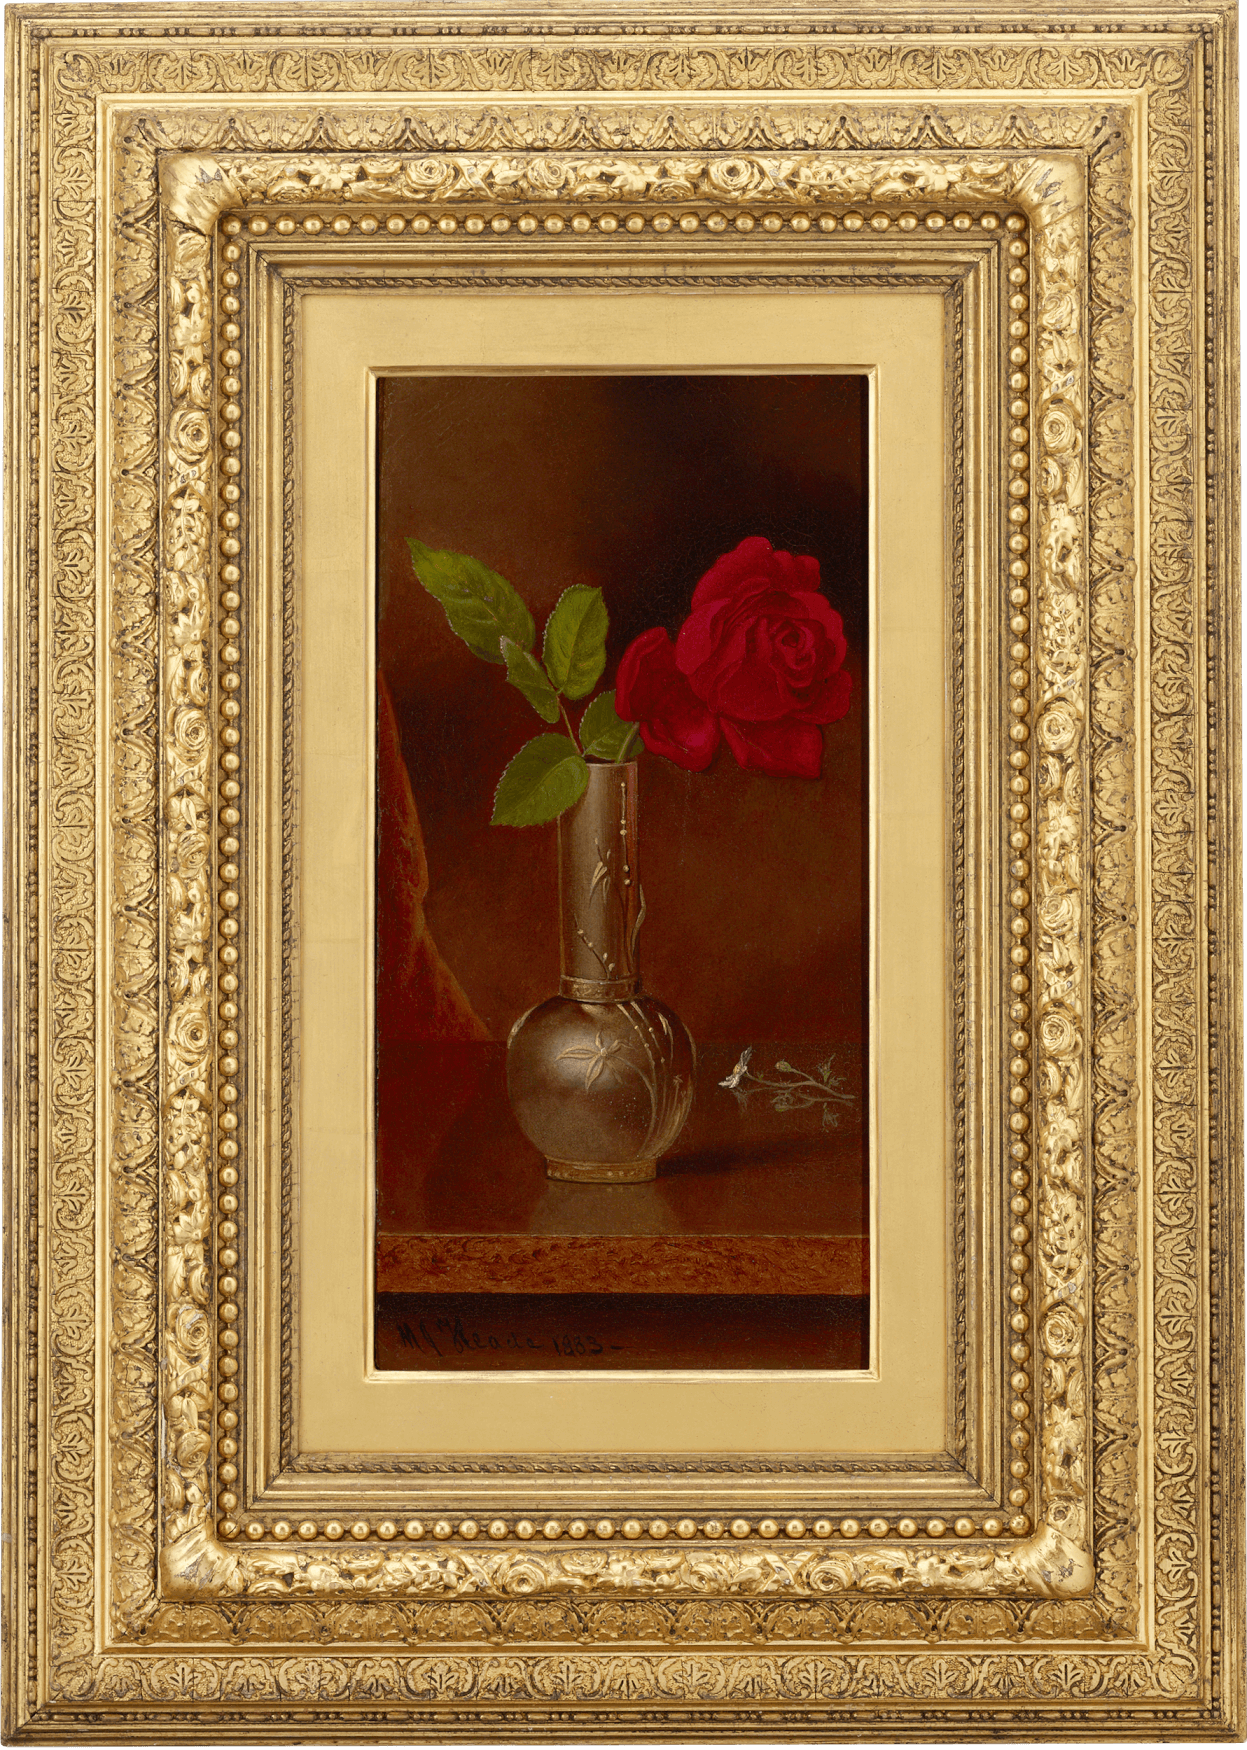 Red Rose in a Standing Vase by Martin Johnson Heade